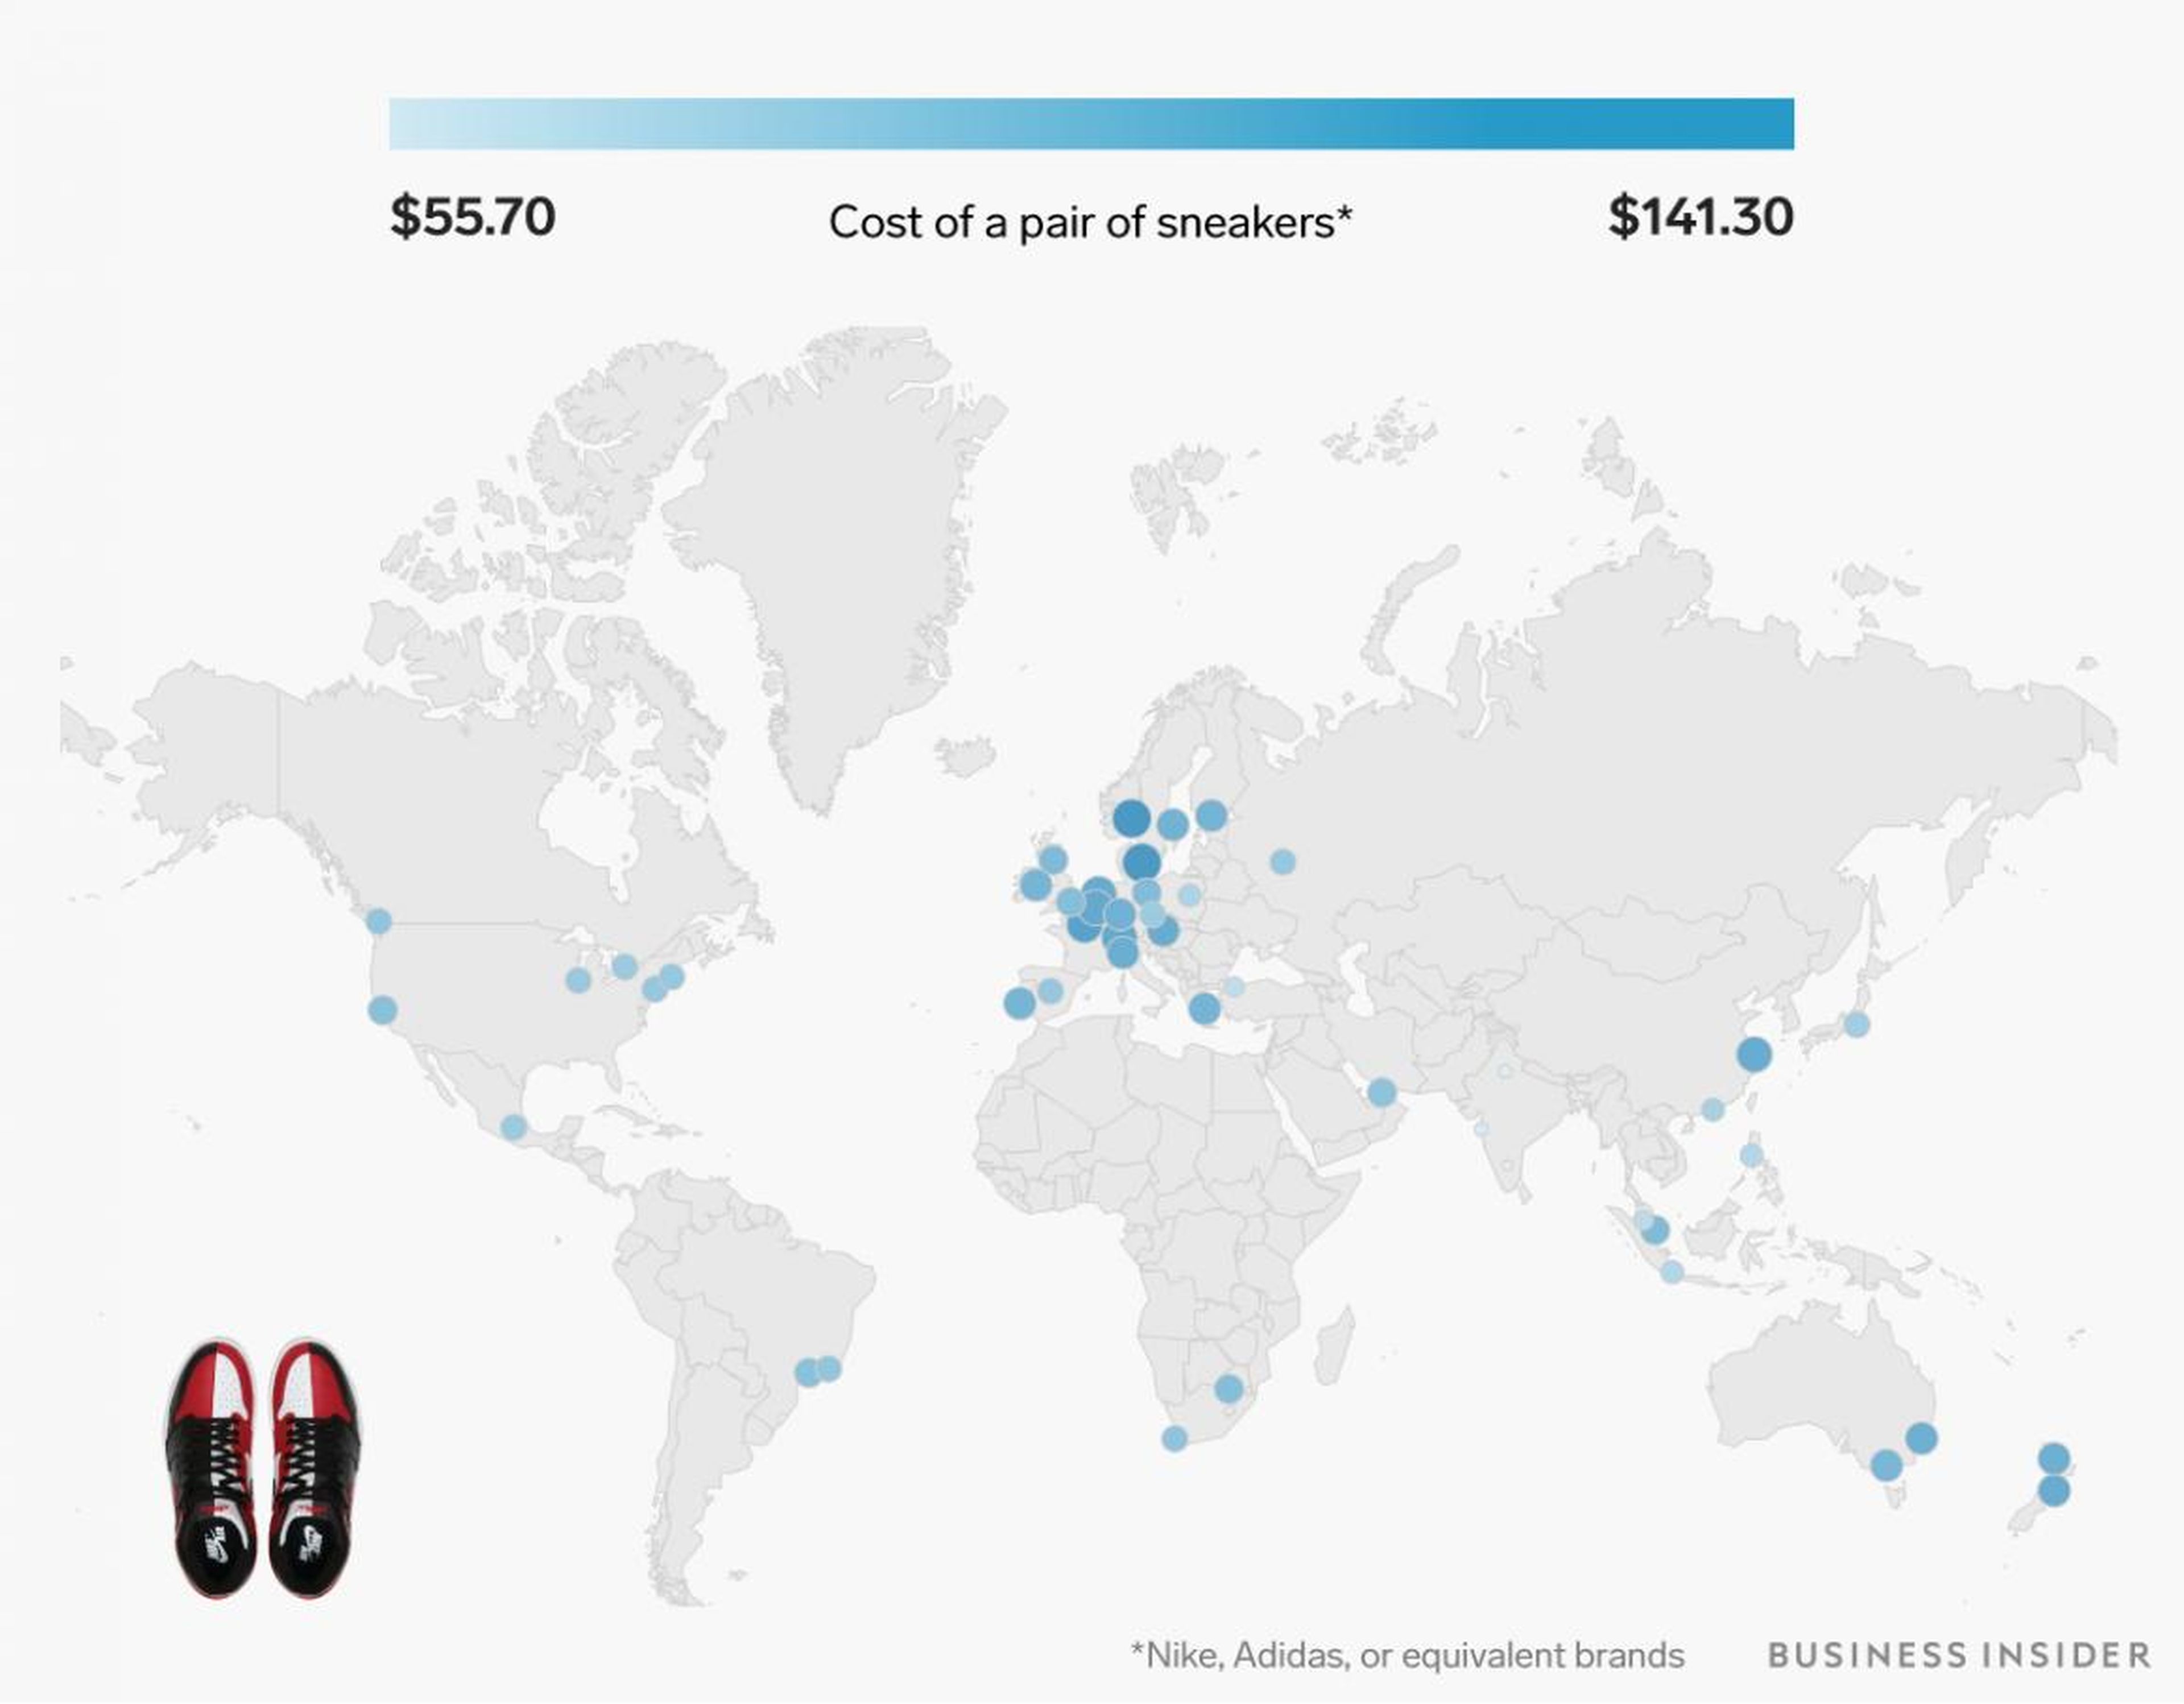 A pair of Nike or Adidas sneakers ranges from $55 to $141.